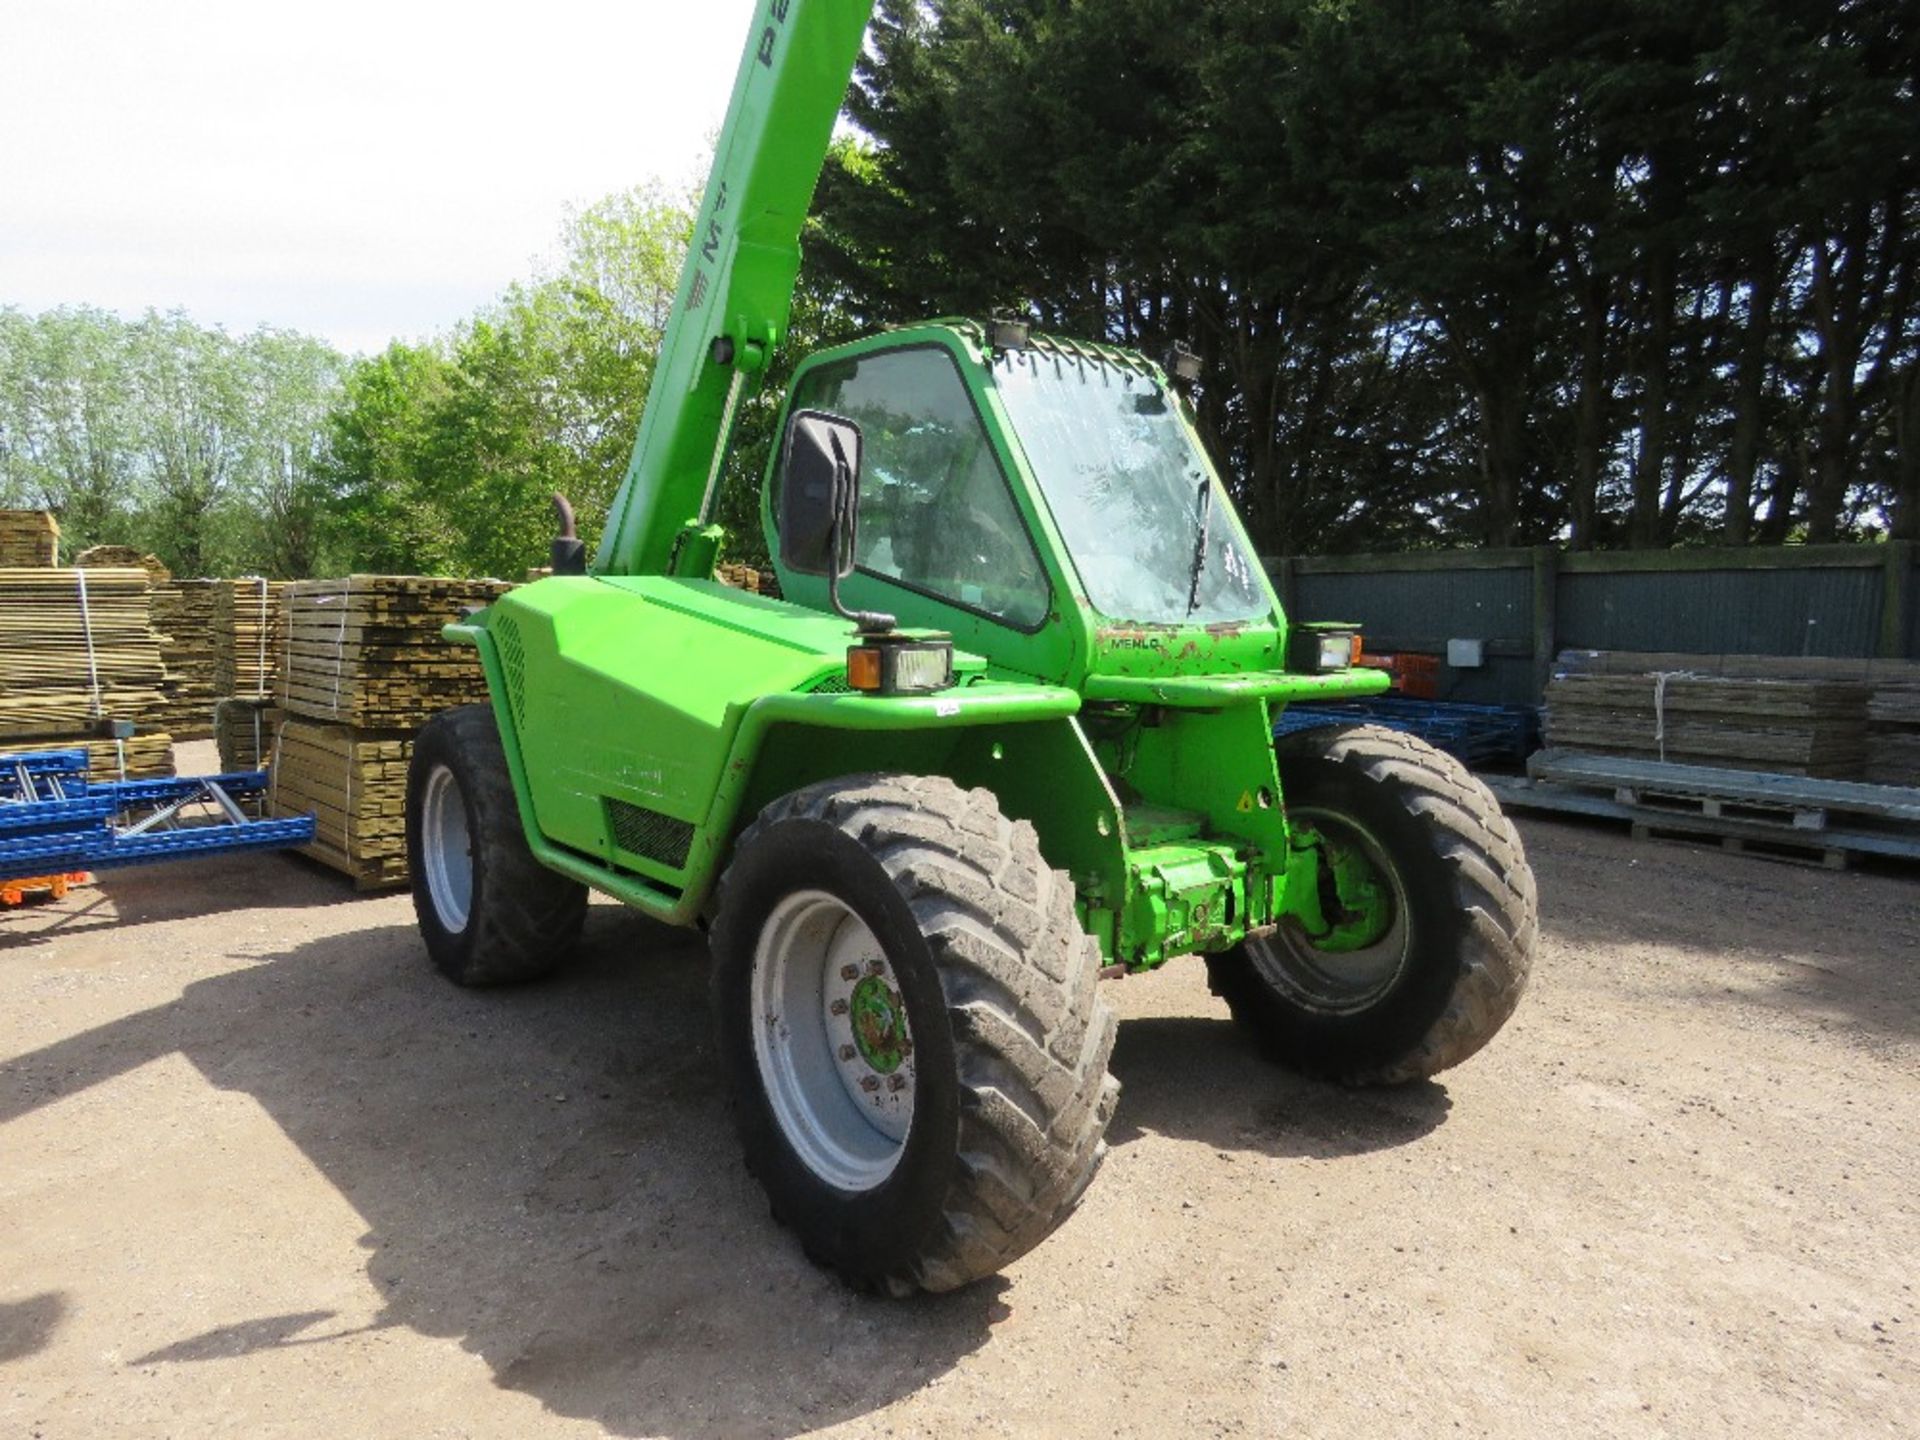 MERLO PANORAMIC P28.7 AGRI SPEC TELESCOPIC HANDLER, YEAR 2004 BUILD. 9764 REC HOURS. WHEN TESTED WAS - Image 8 of 13